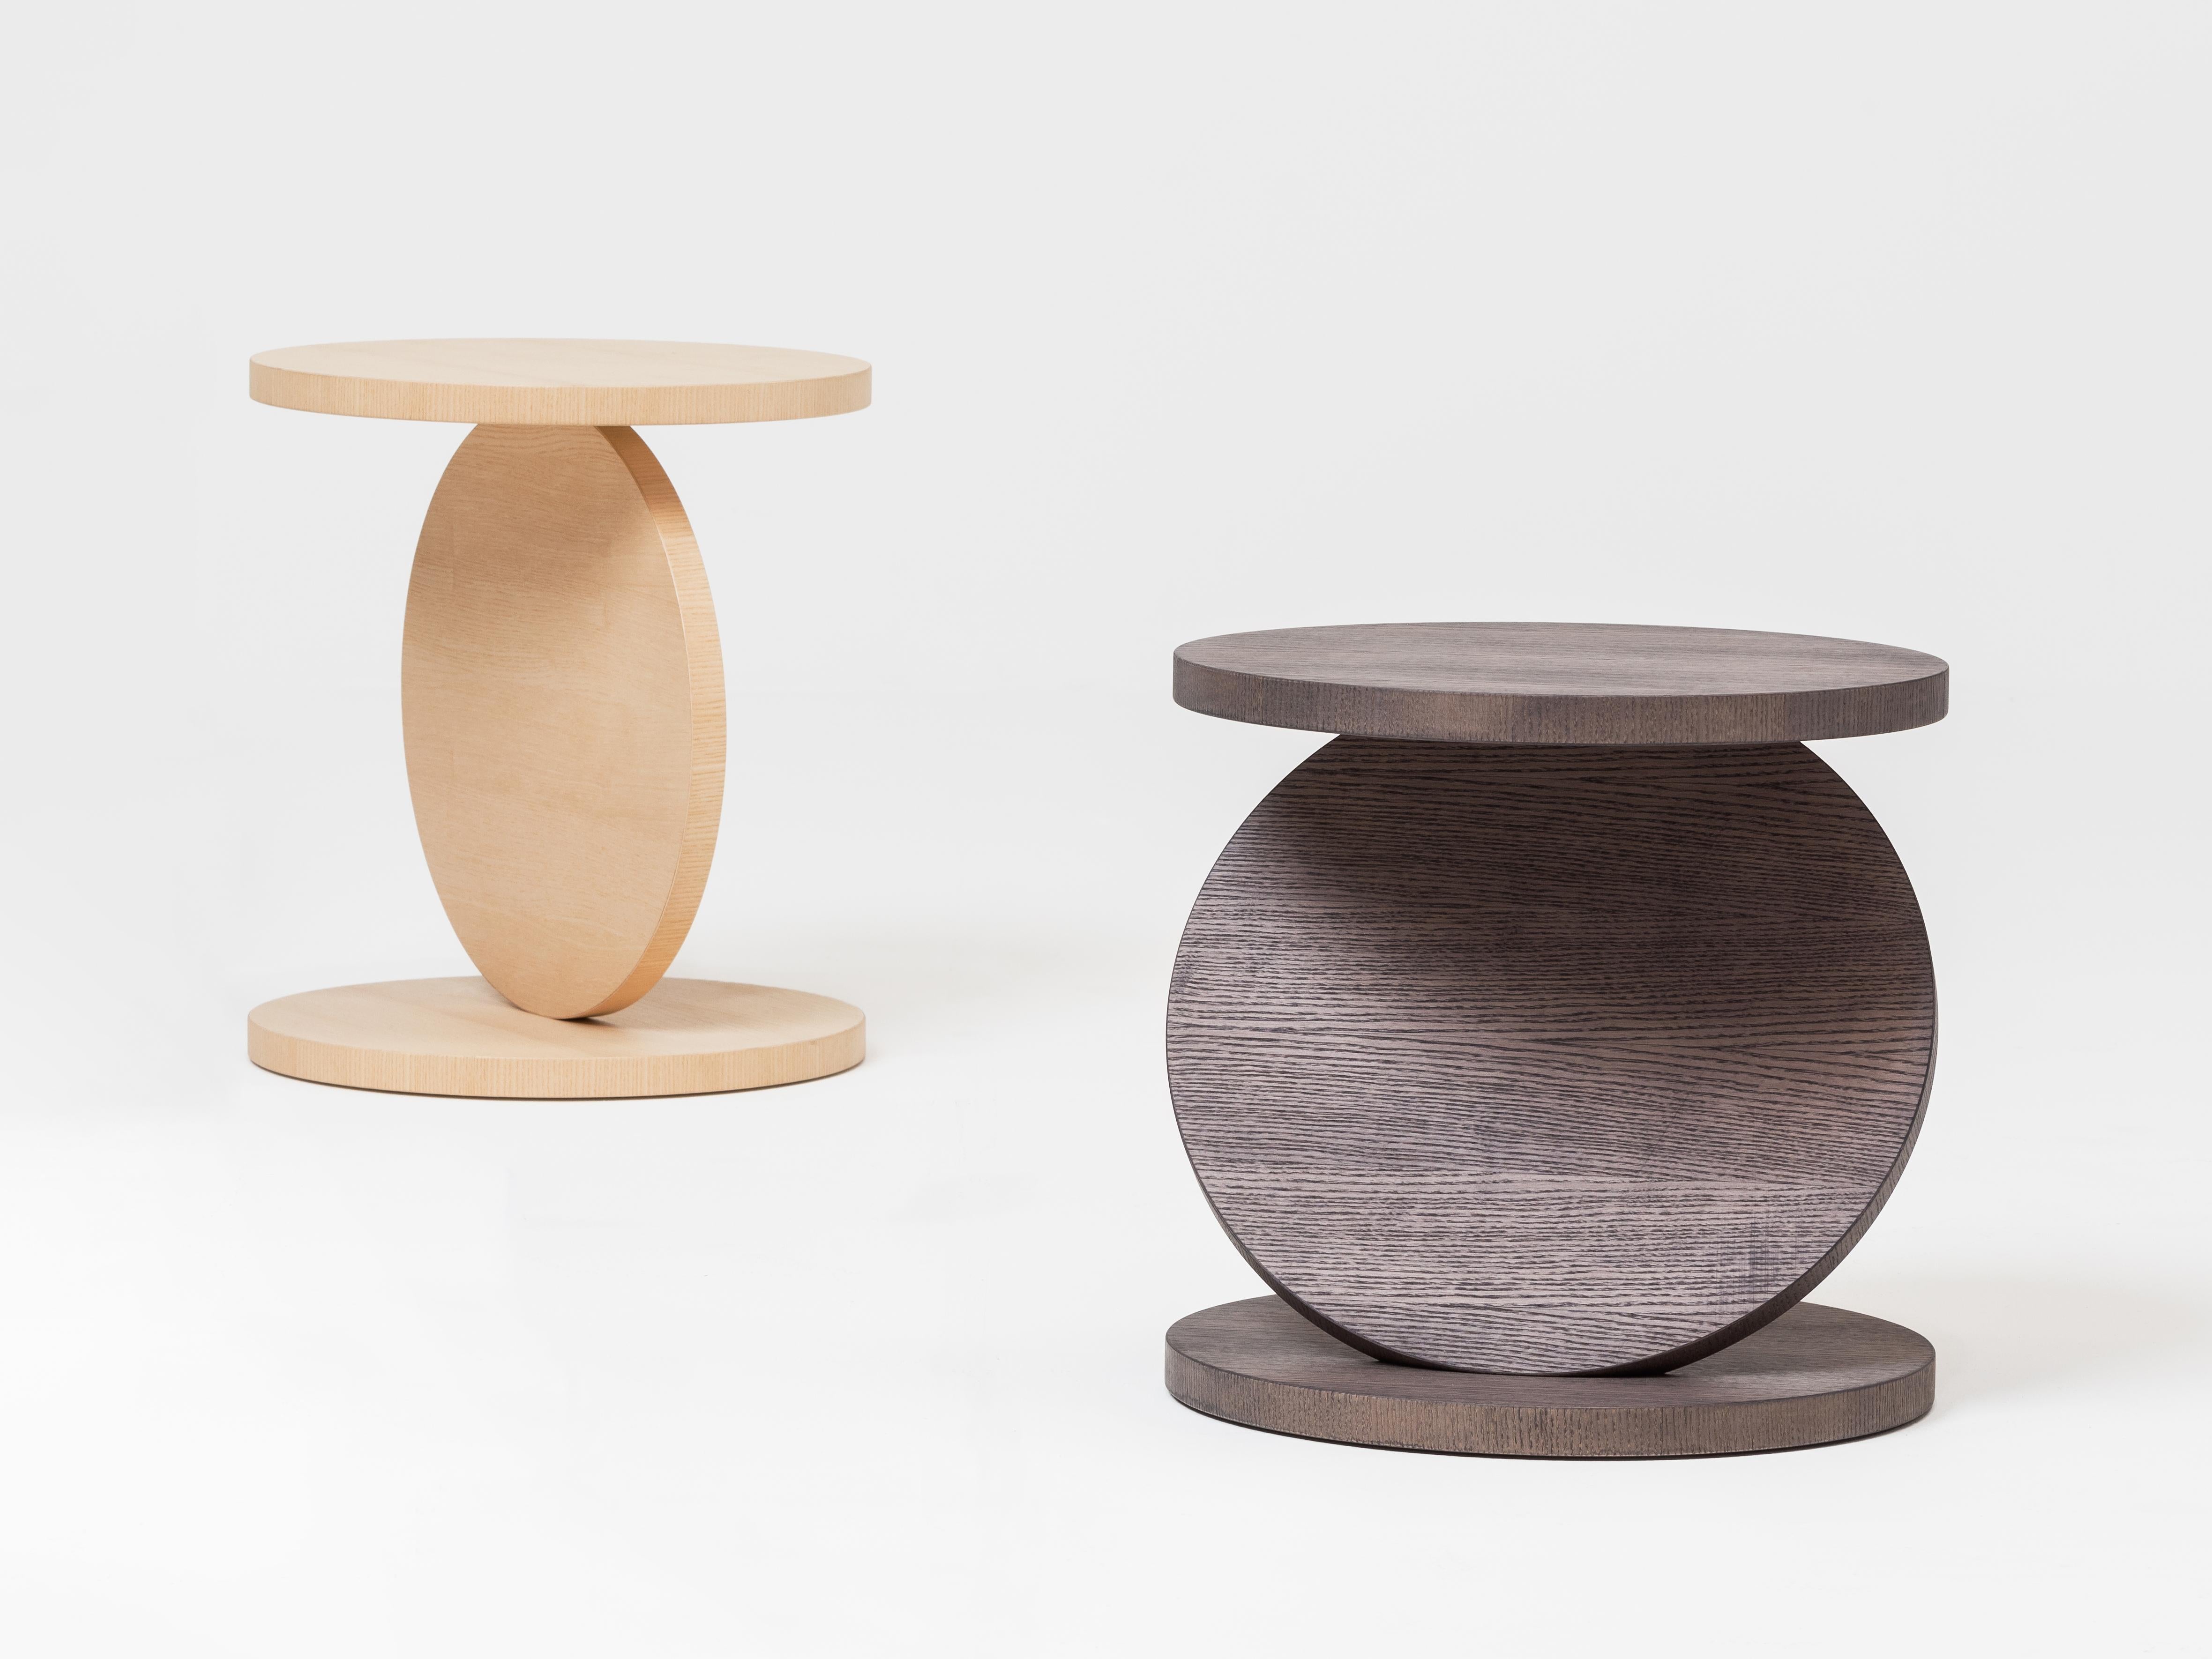 The geometrically shaped yet dynamic solid wood coffee tables in the Match Point collection come in three different heights and boast natural wooden finishes. Three circular discs – held together and balancing at 30, 60 and 90 degrees – are at the